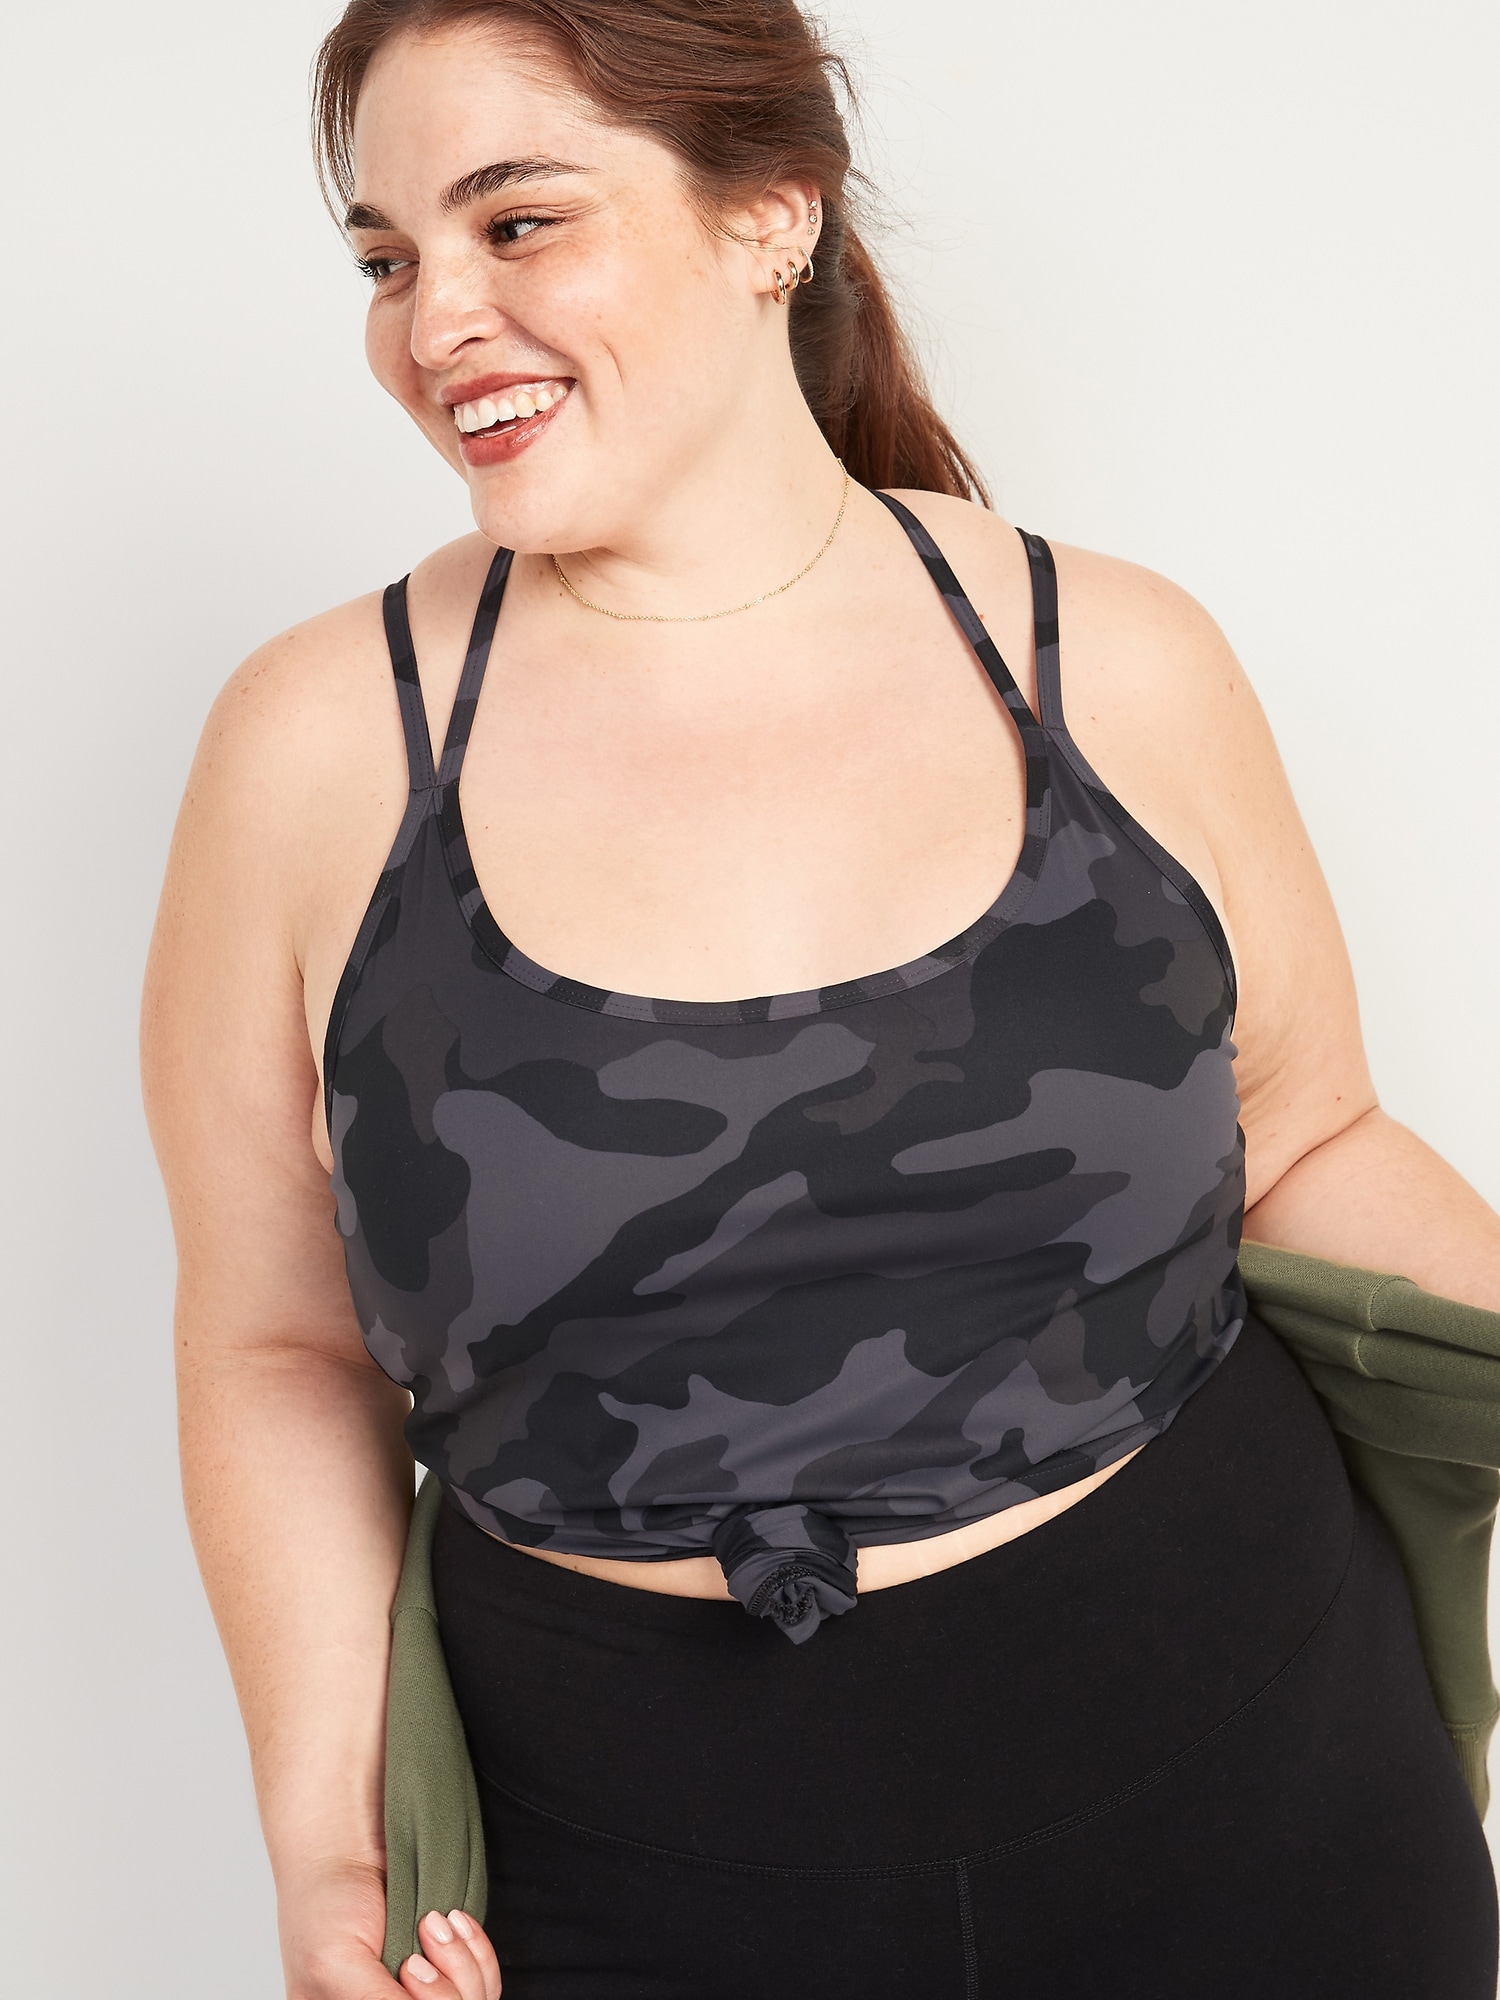 Old Navy PowerSoft Cropped Shelf-Bra Tank Top Review